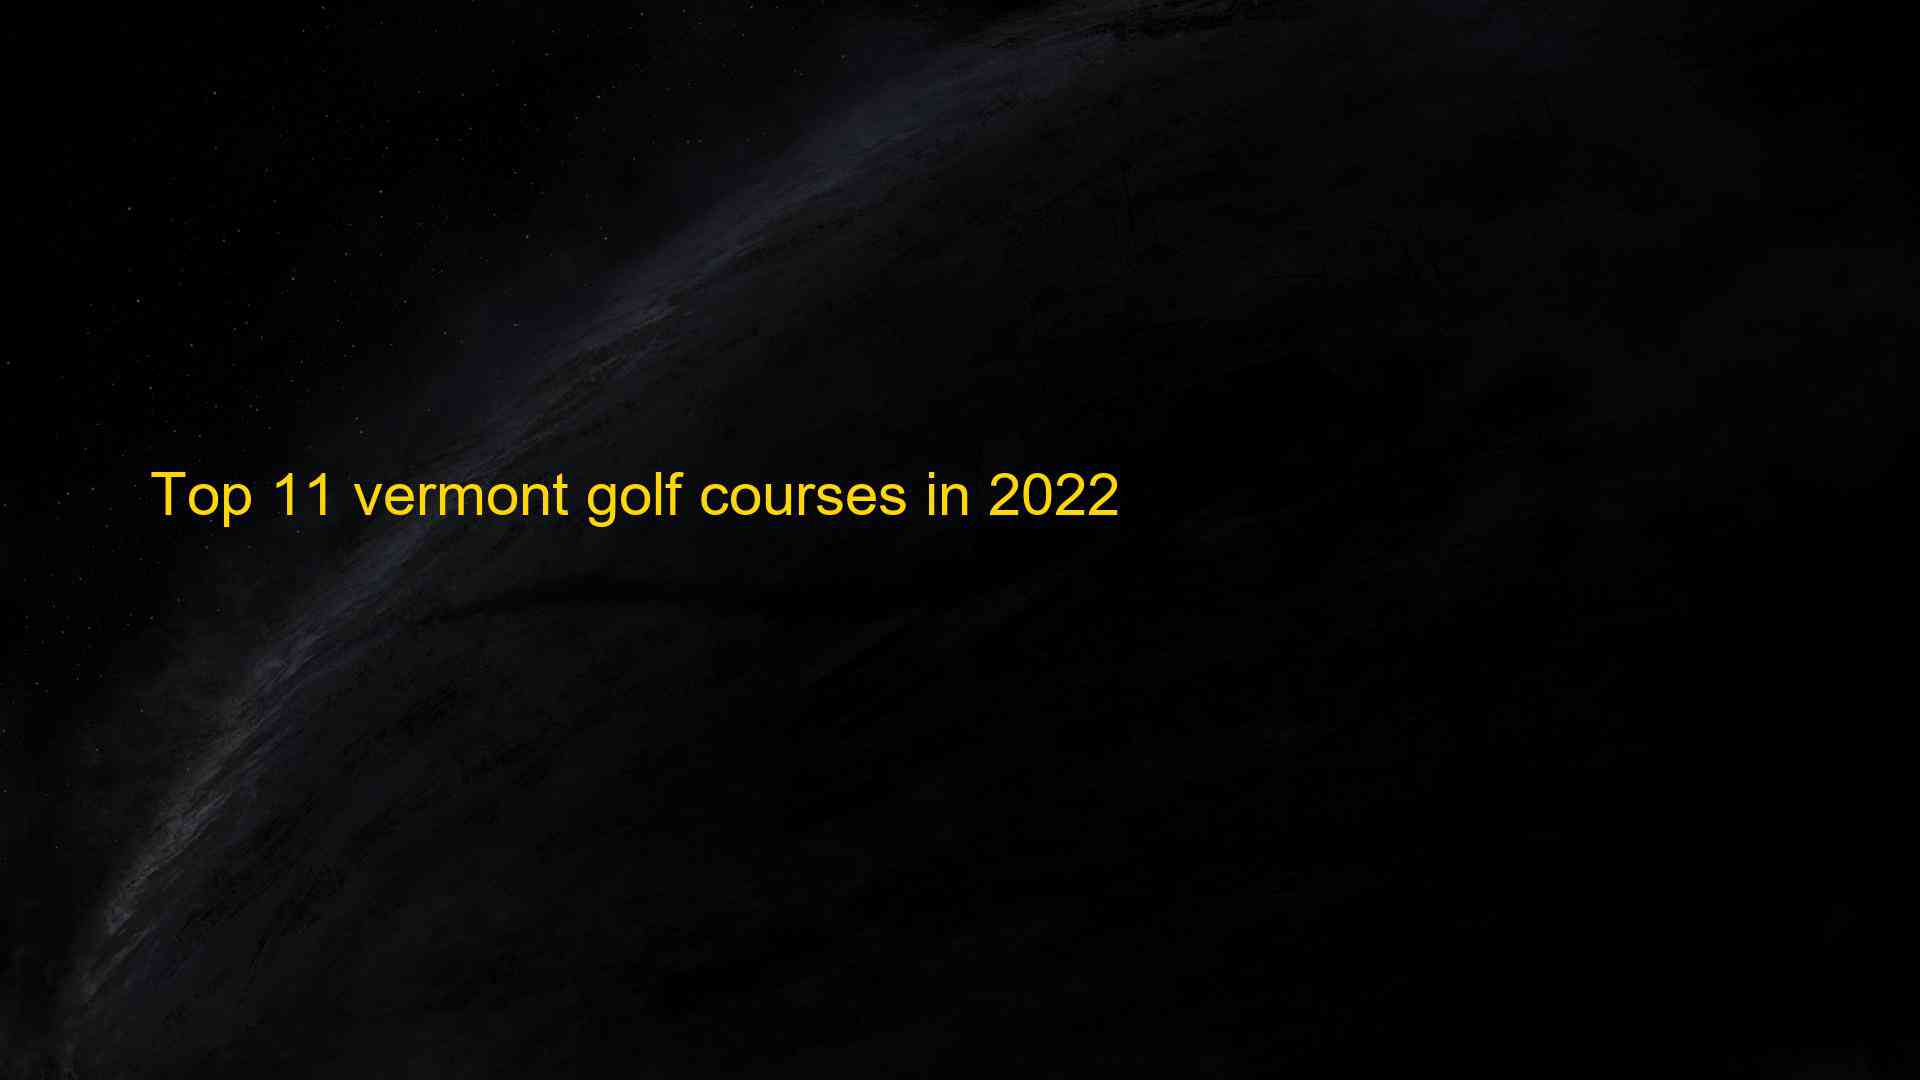 Top 11 vermont golf courses in 2022 1661604531